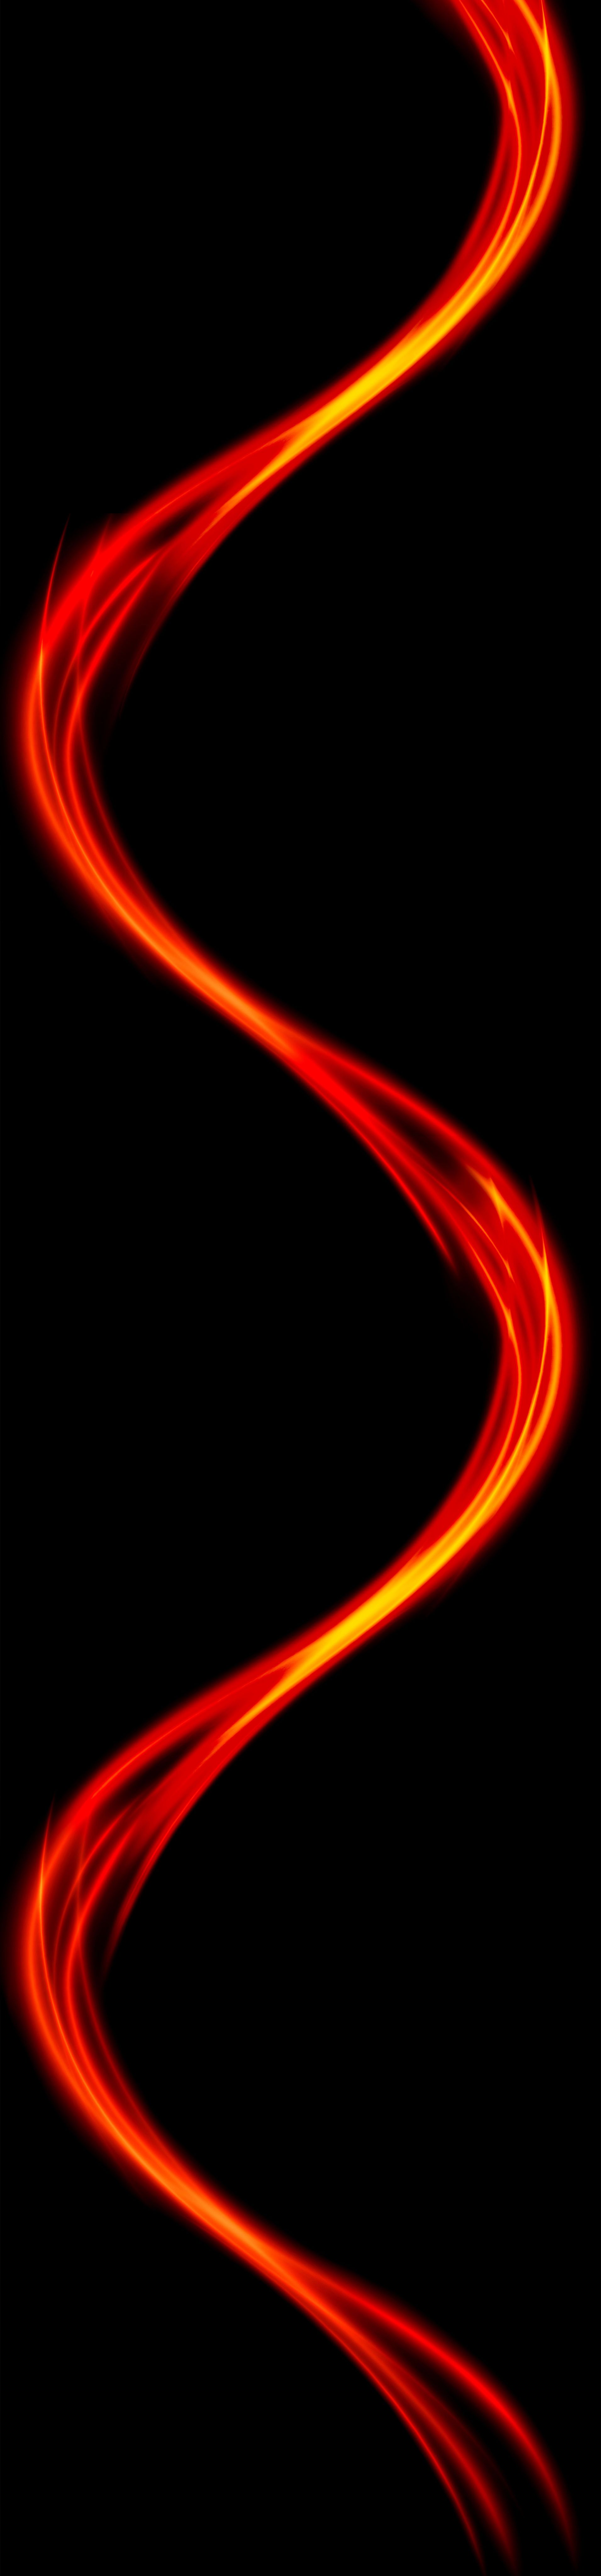 Black background with a red and yellow spiral light flare